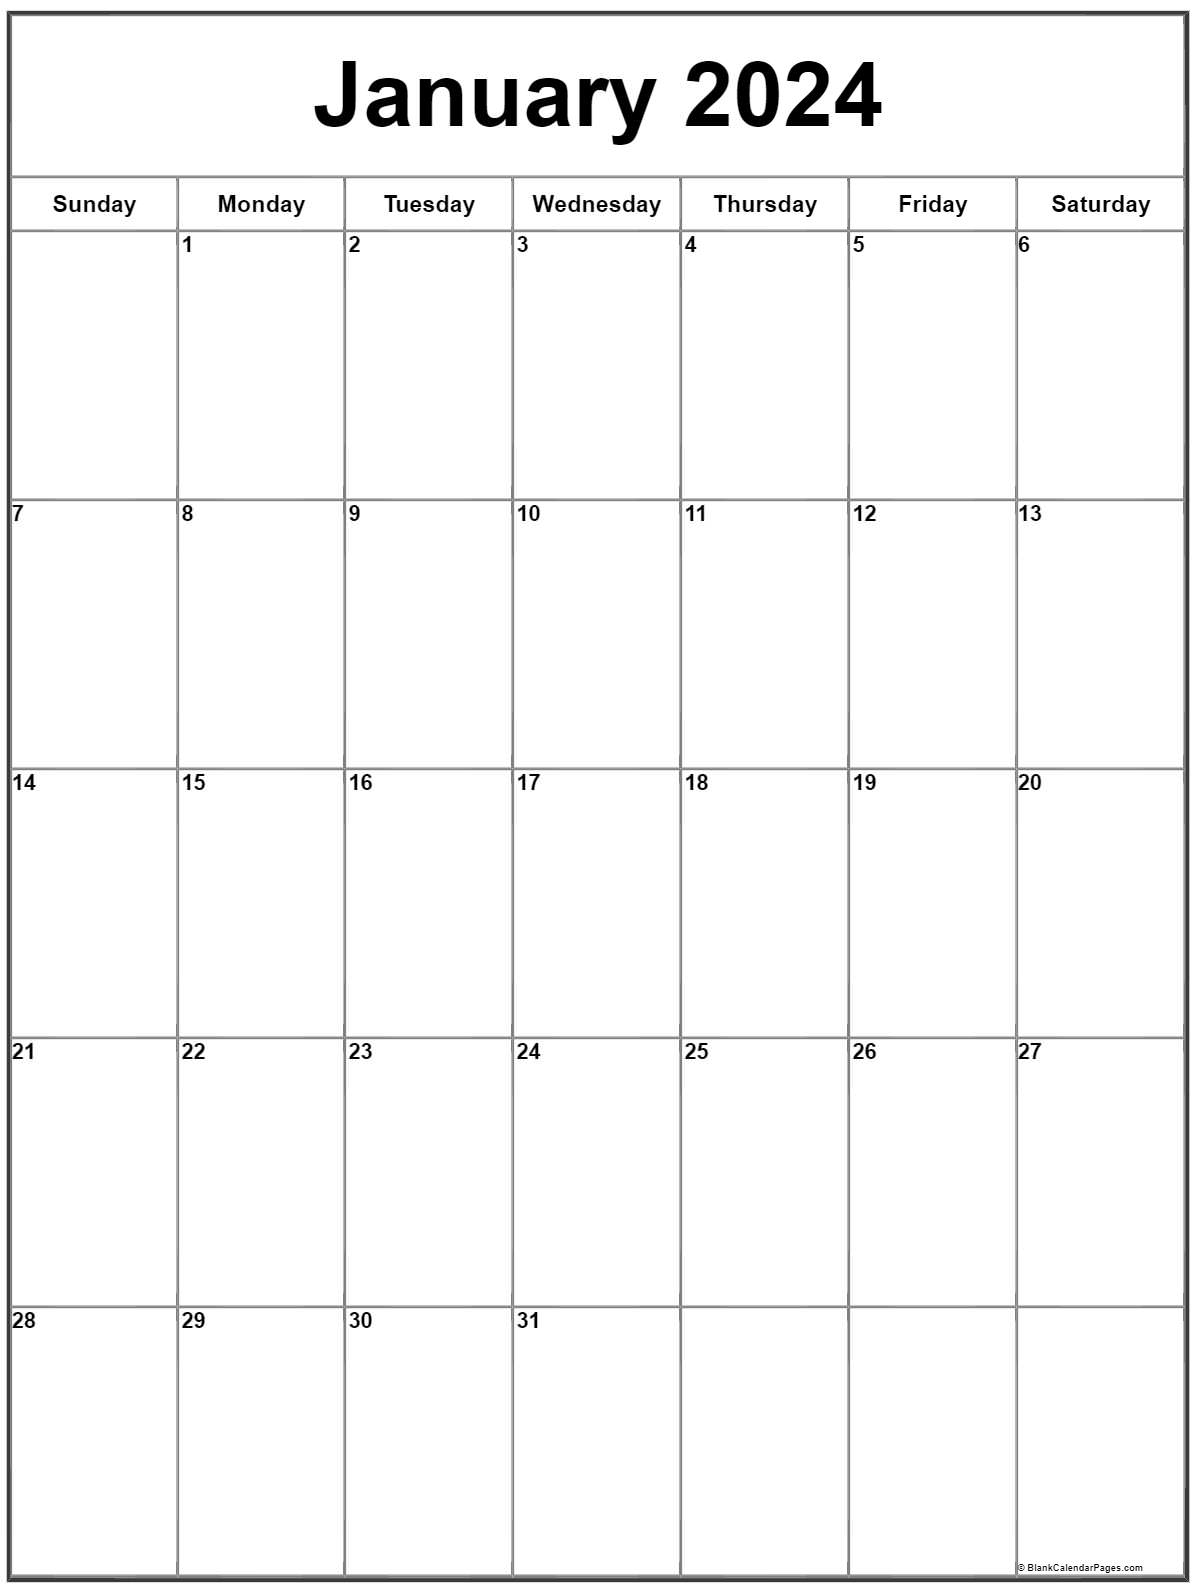 January 2024 Vertical Calendar | Portrait for Monthly Calendar 2024 Printable With Holidays